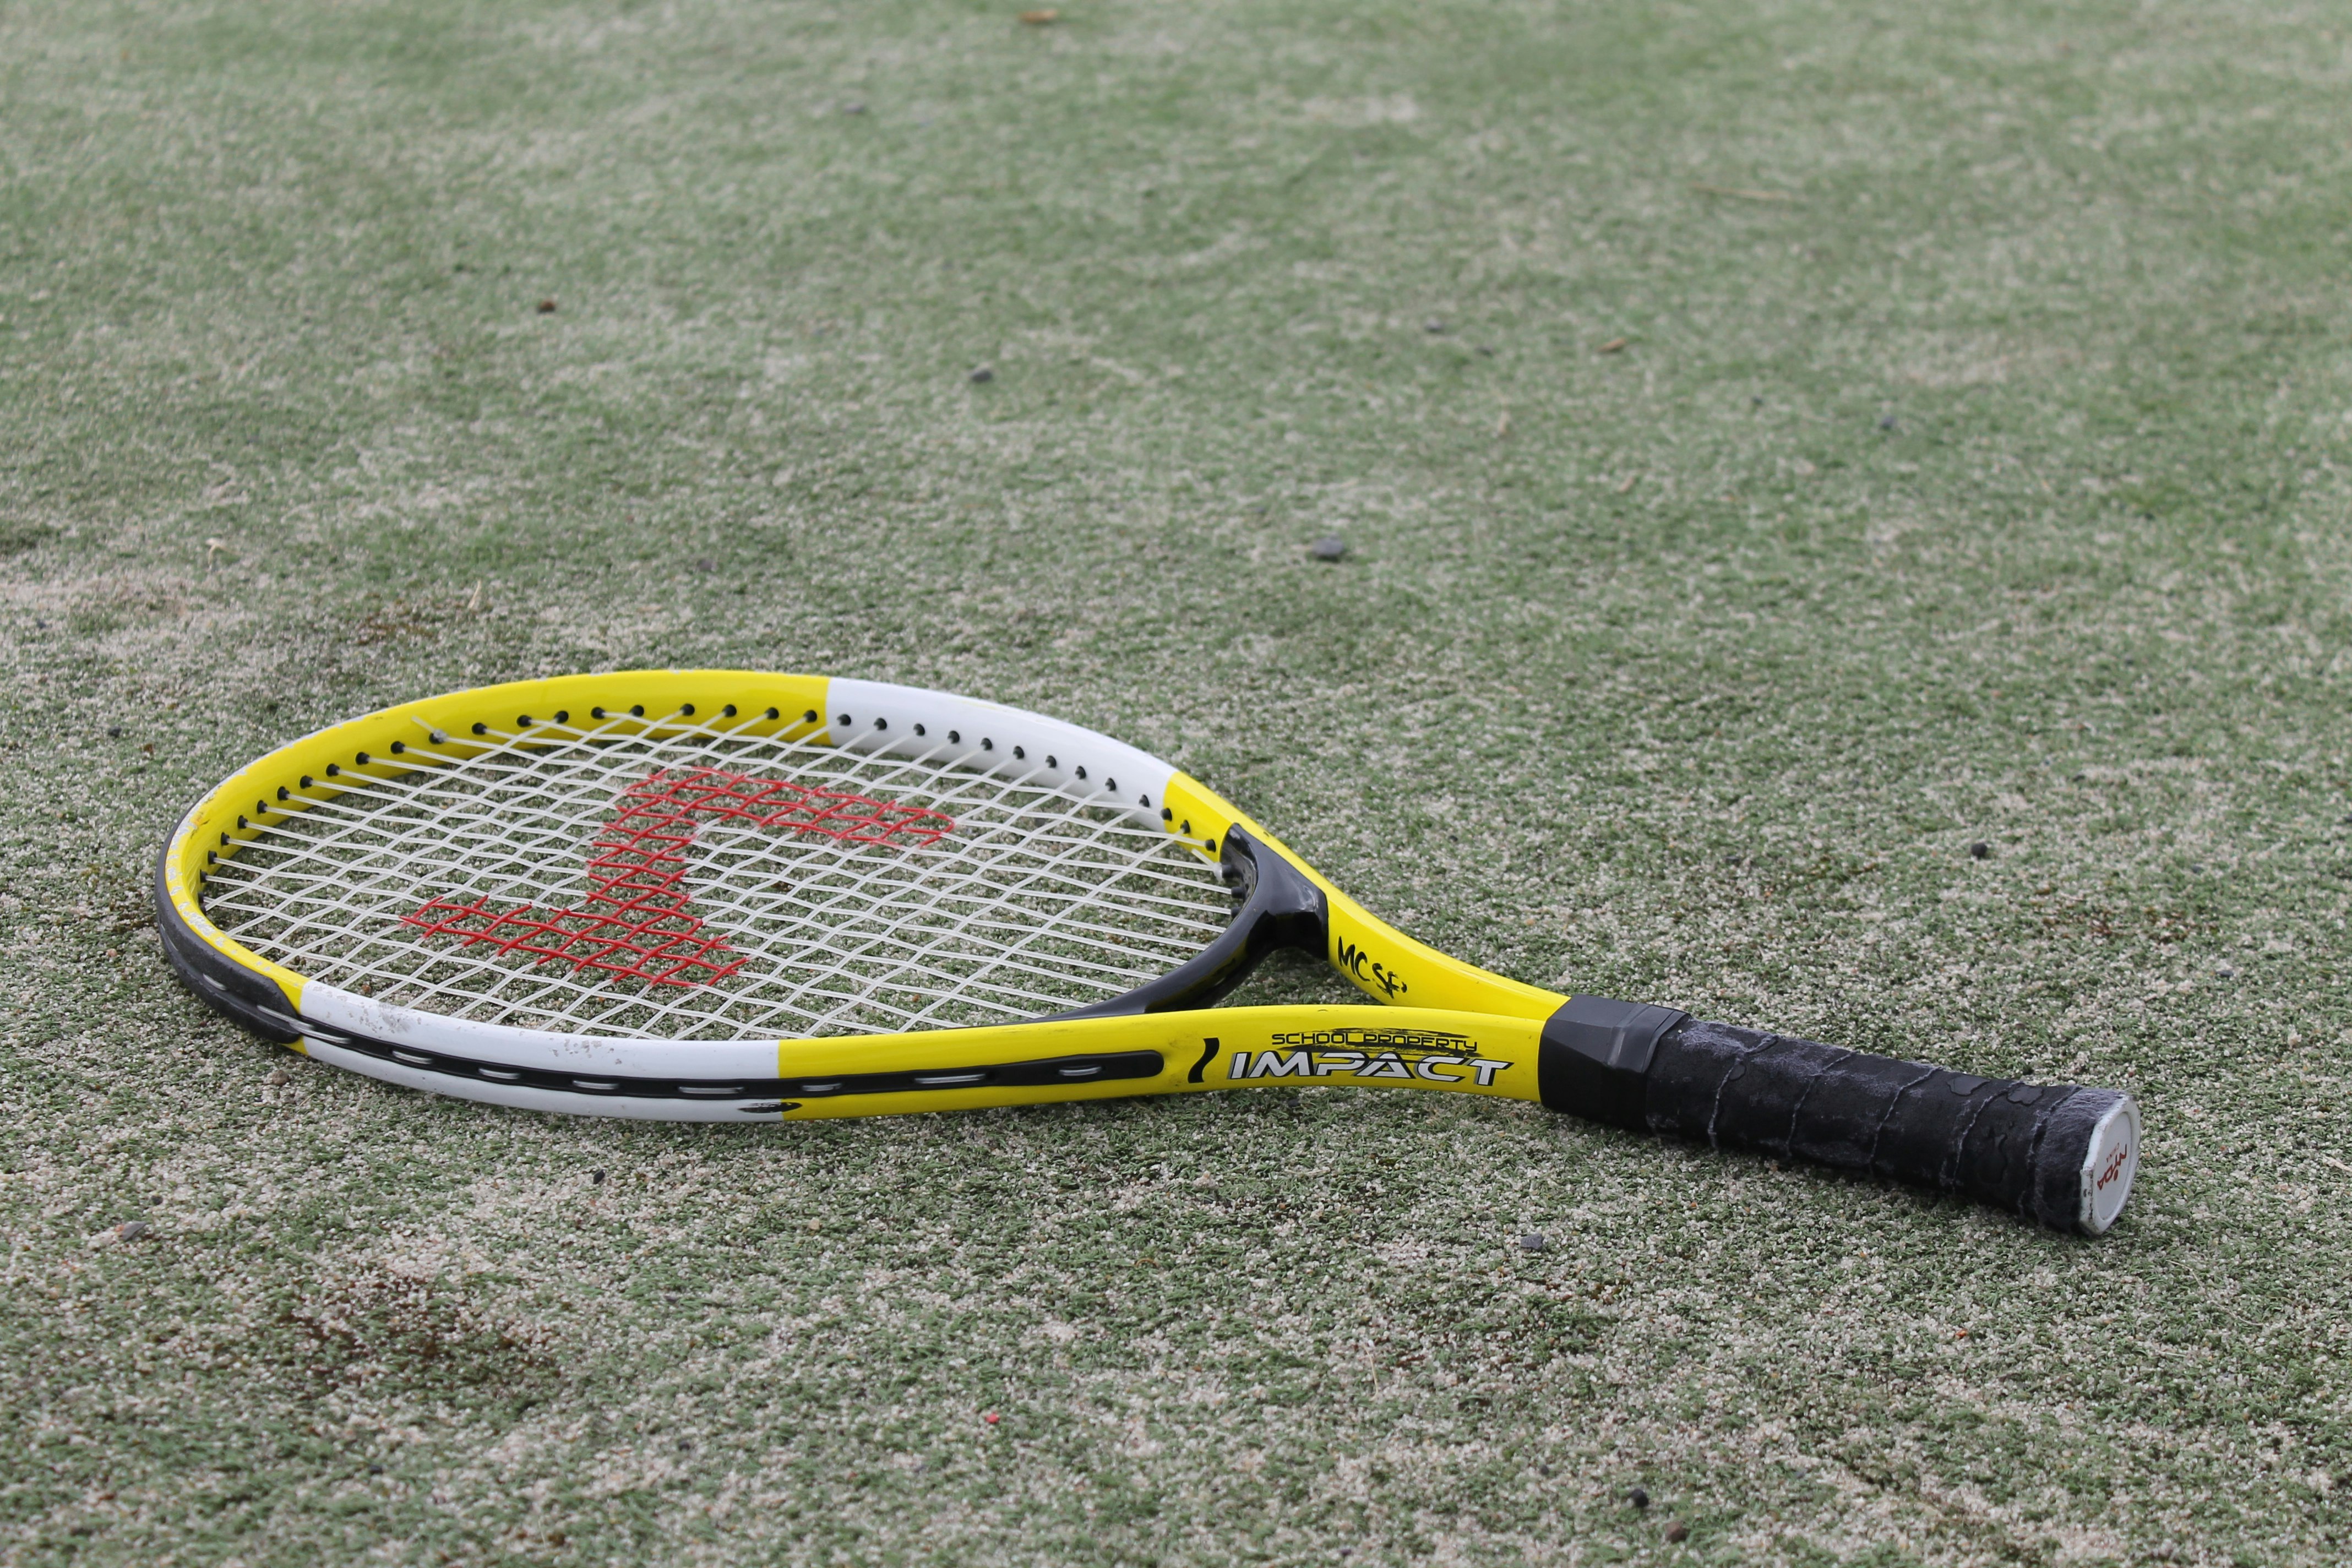 yellow and black tennis racket on green grass field